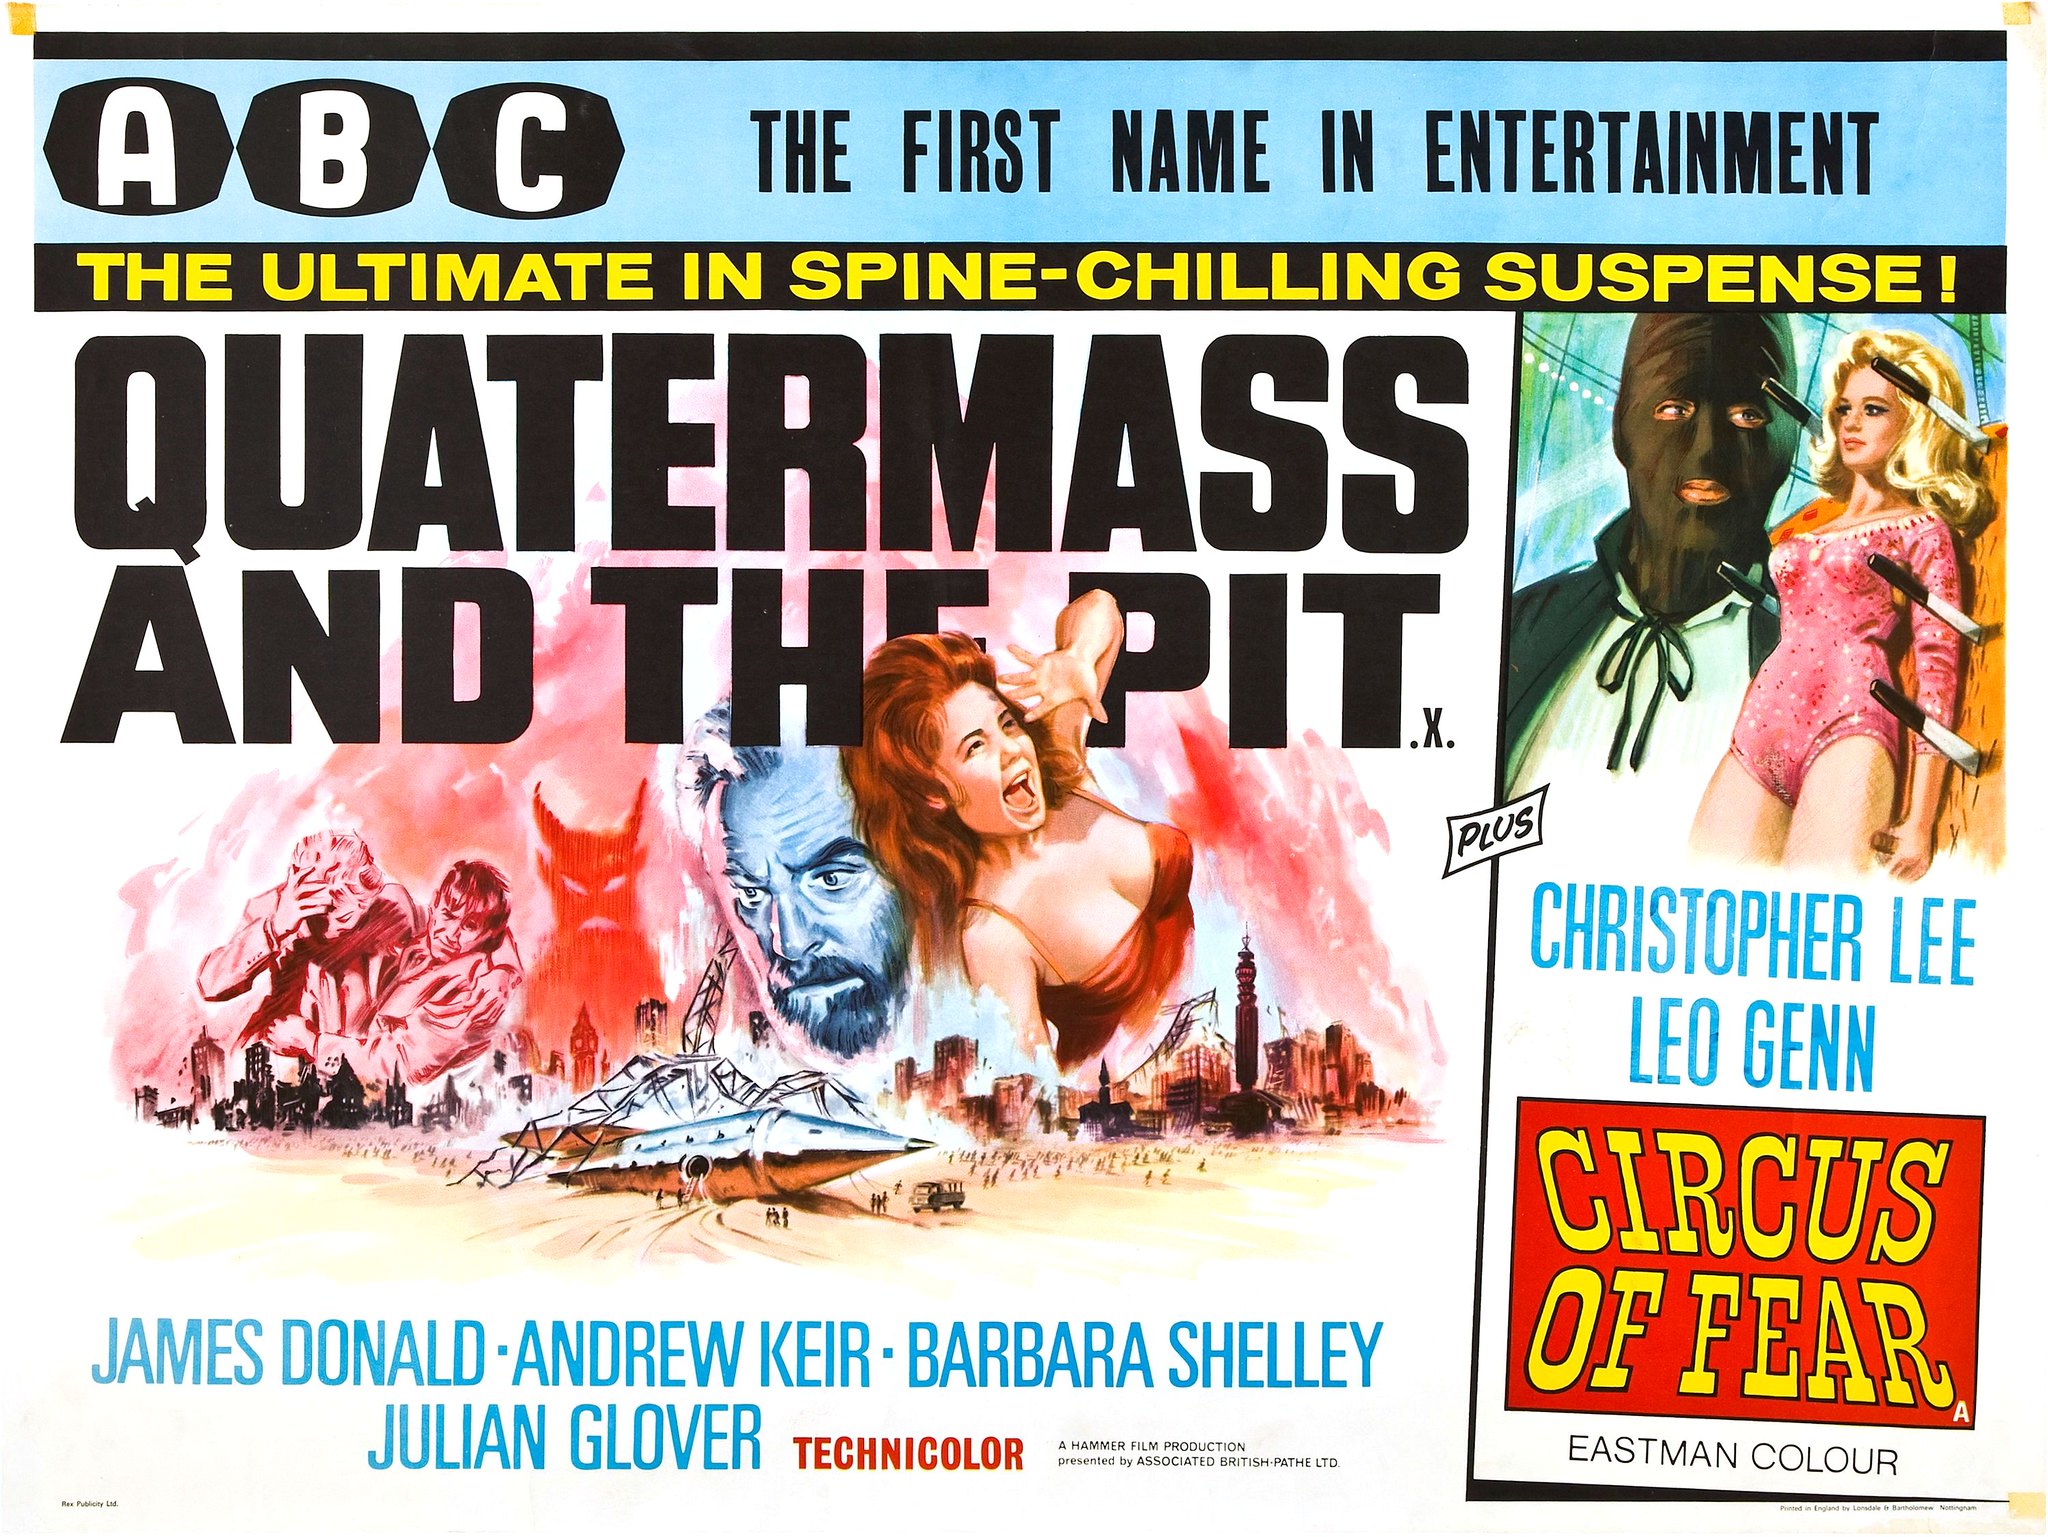 Quatermass and the Pit (1967)